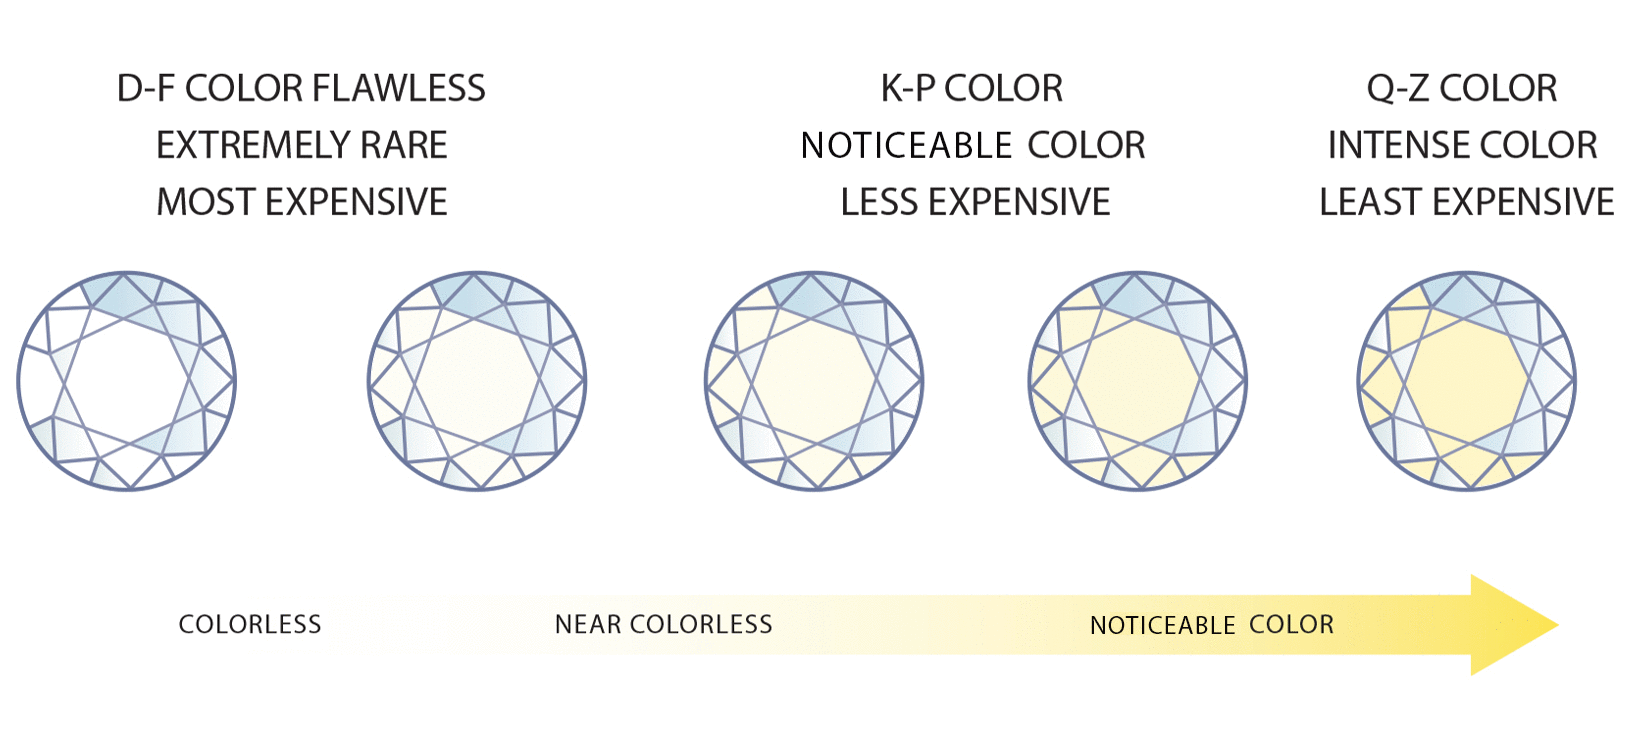 Image comparing colorless stones and stones with noticeable color